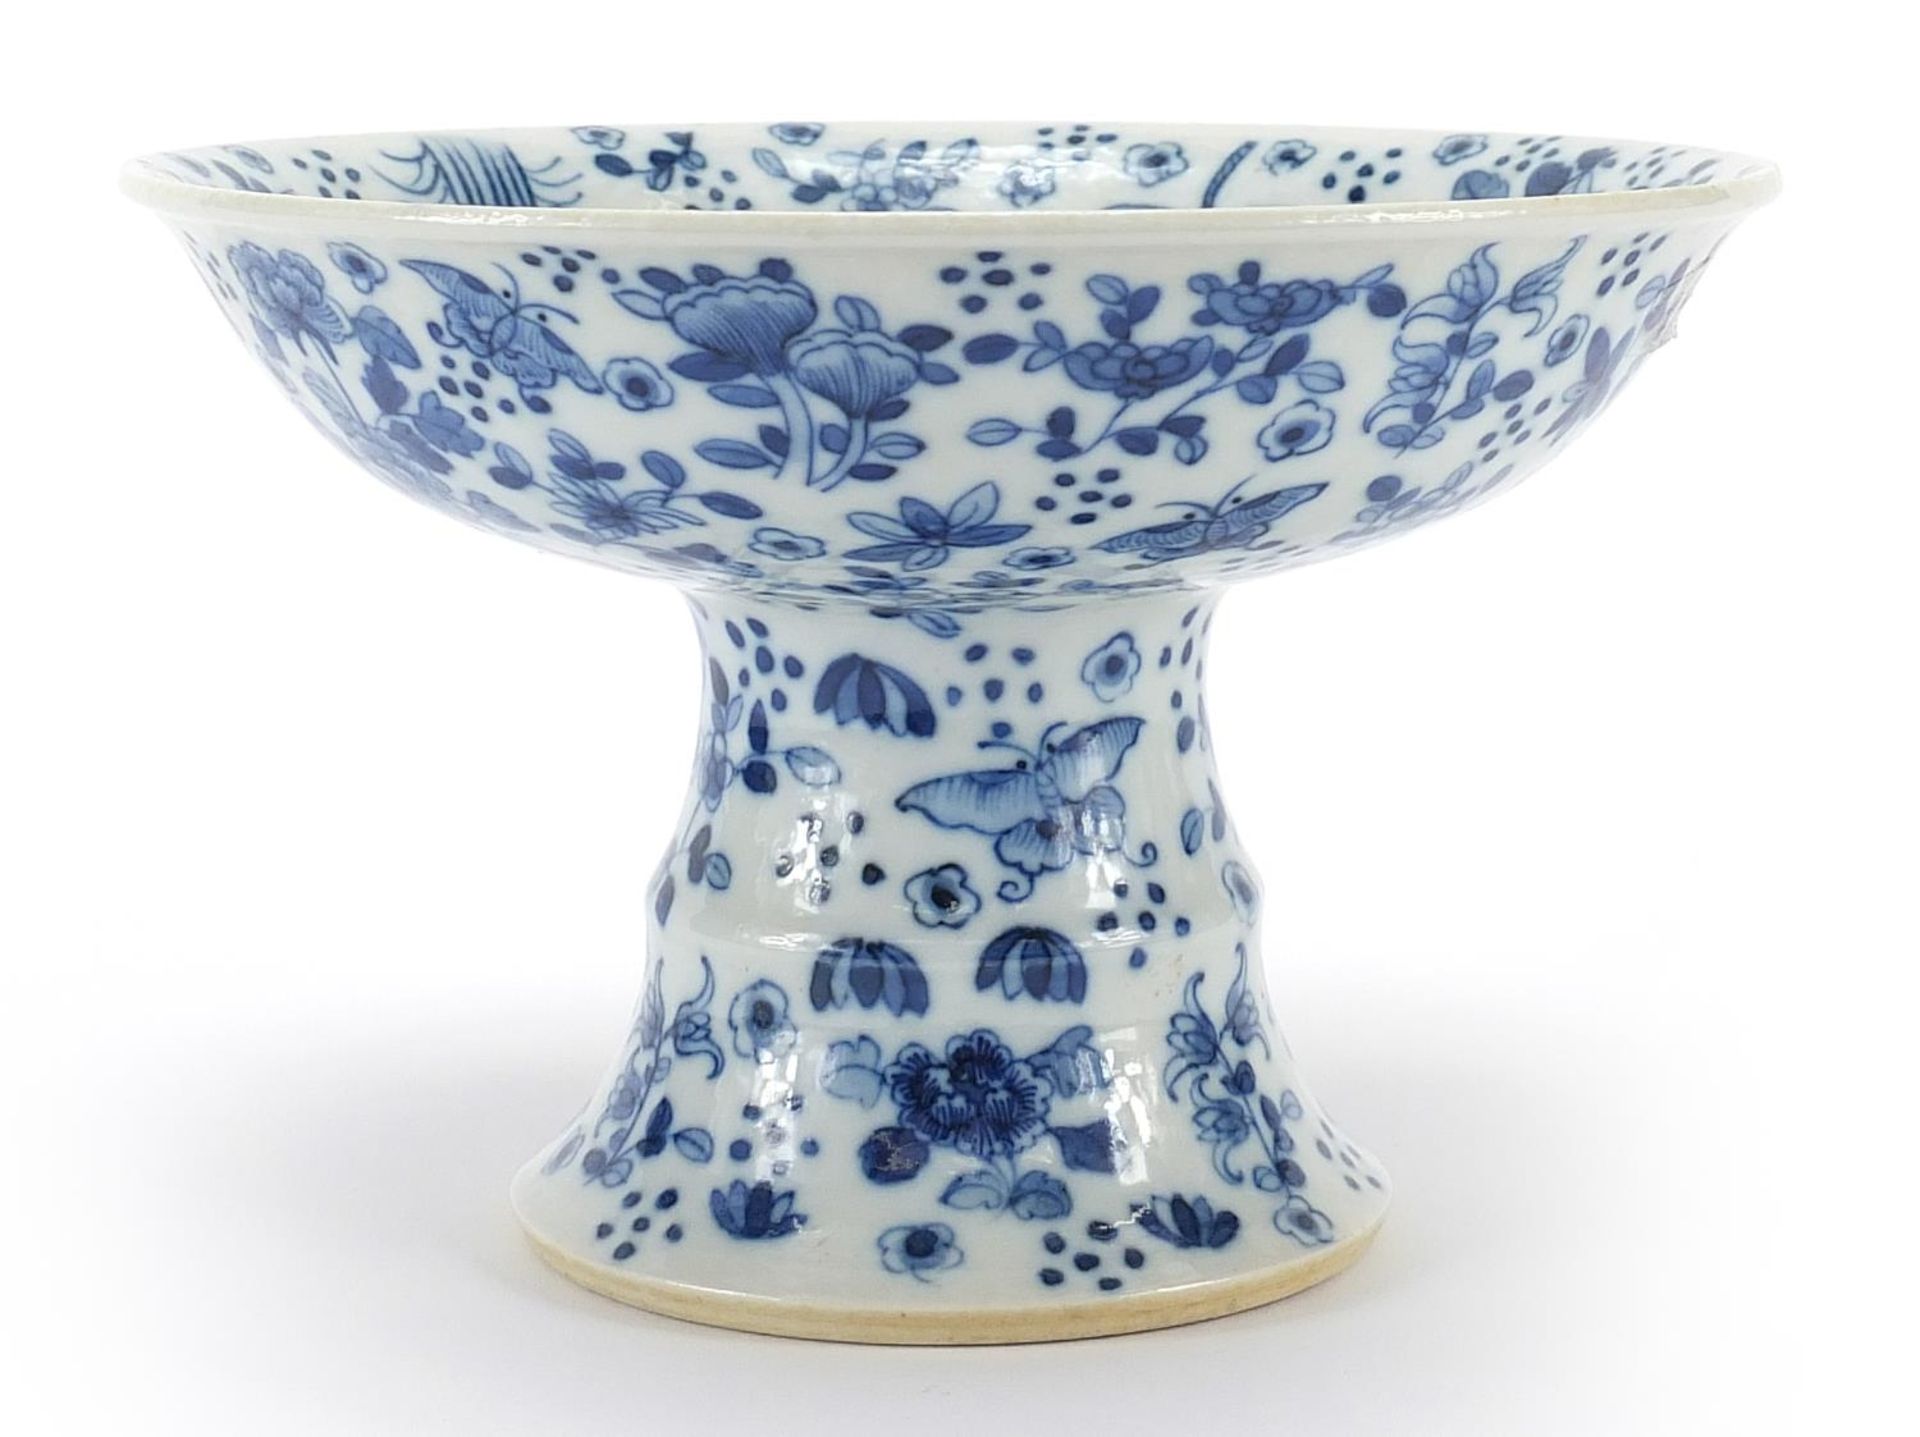 Chinese blue and white porcelain stem dish hand painted with flowers, 14cm high x 21cm in diameter